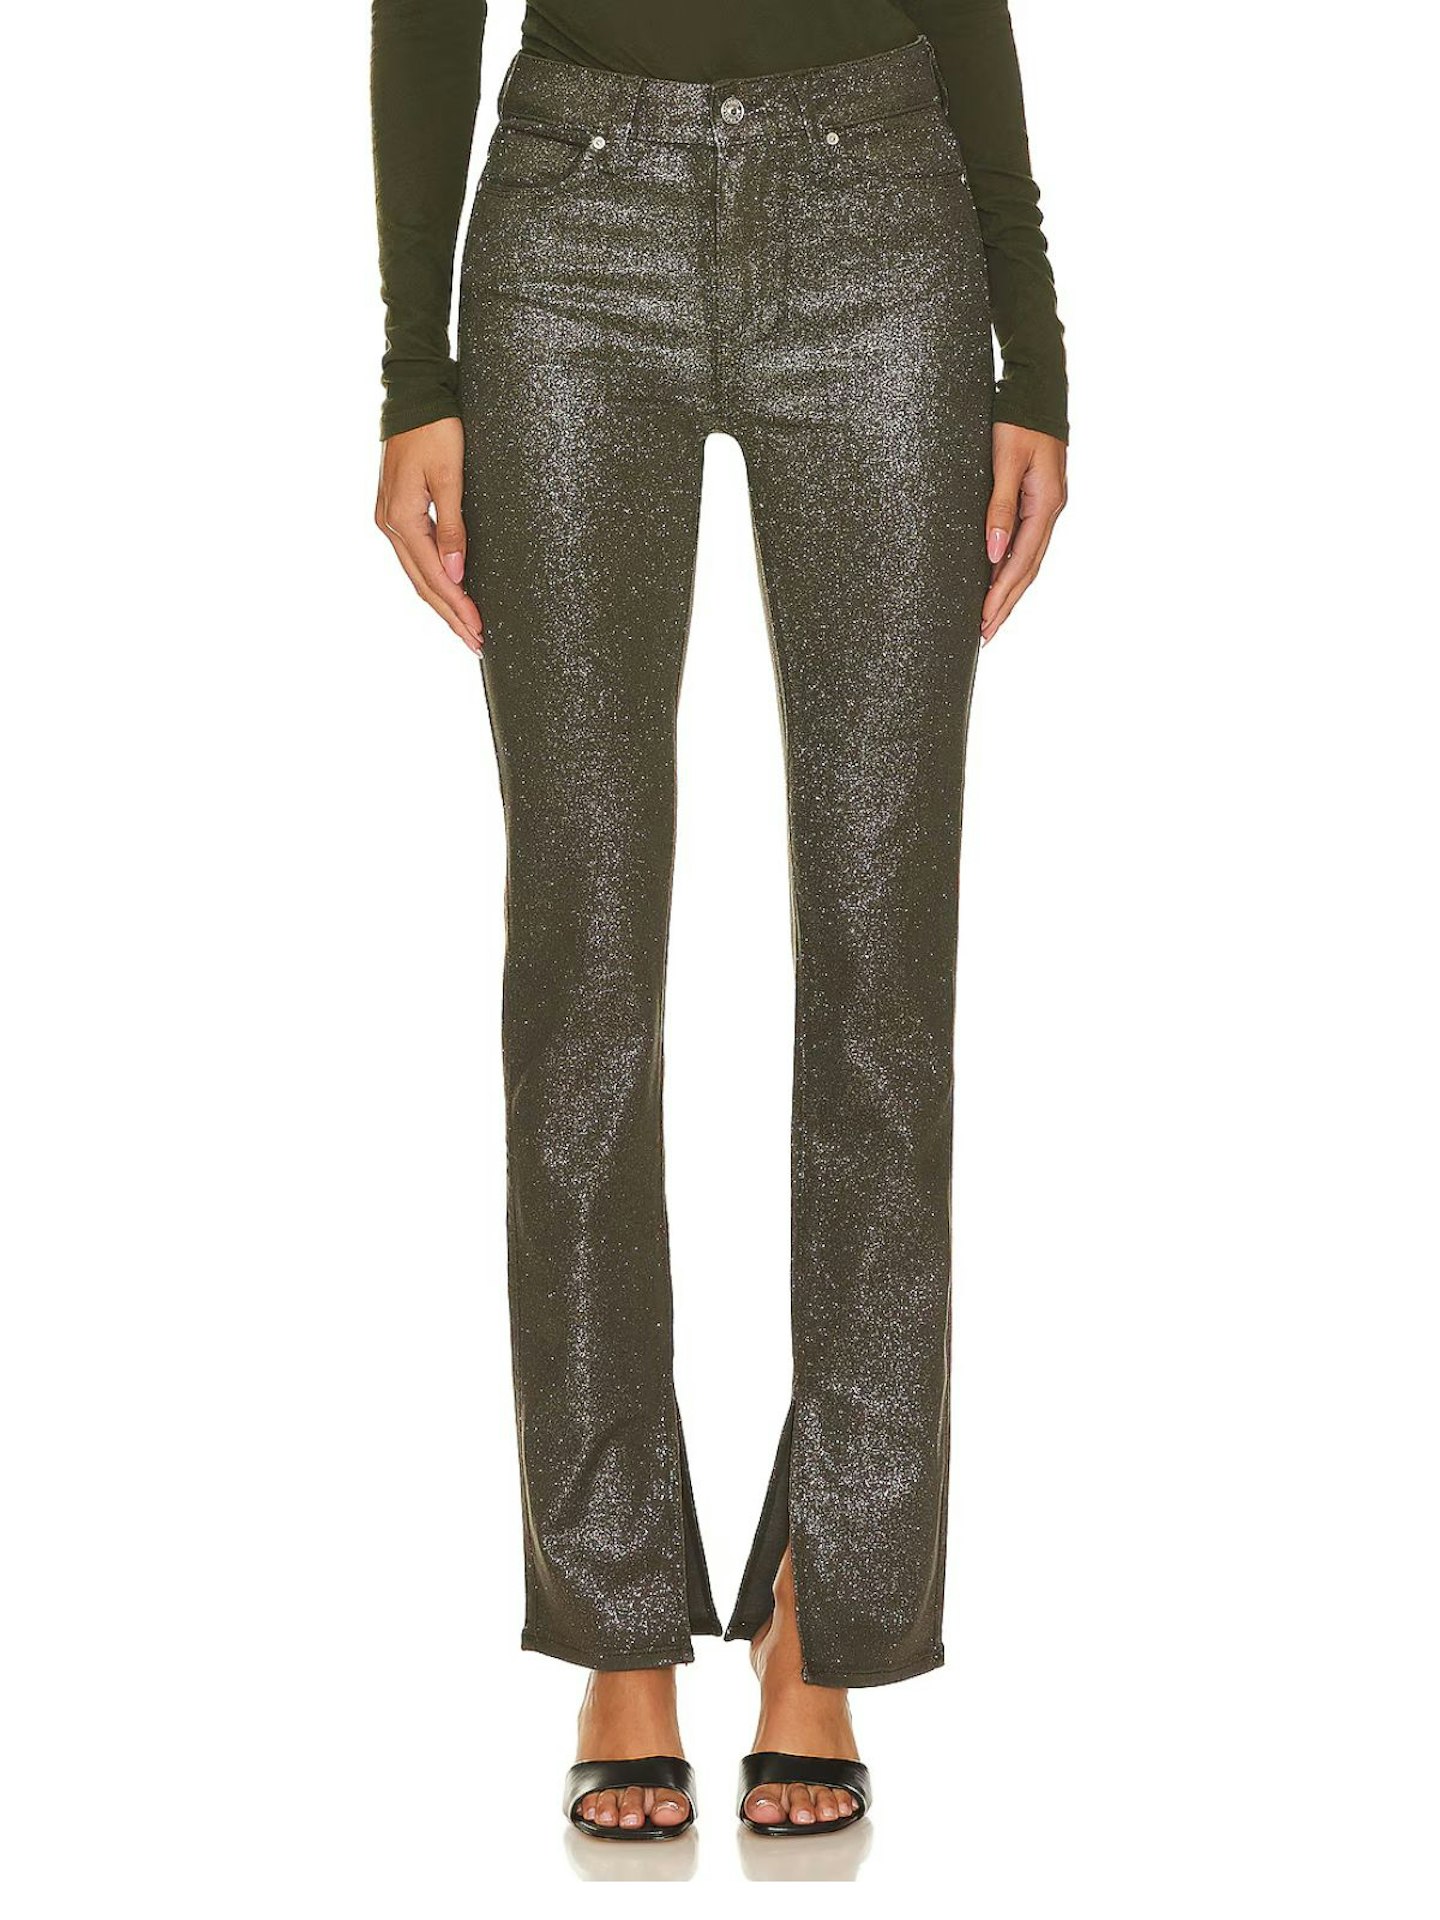 PAIGE, Constance Skinny Jeans